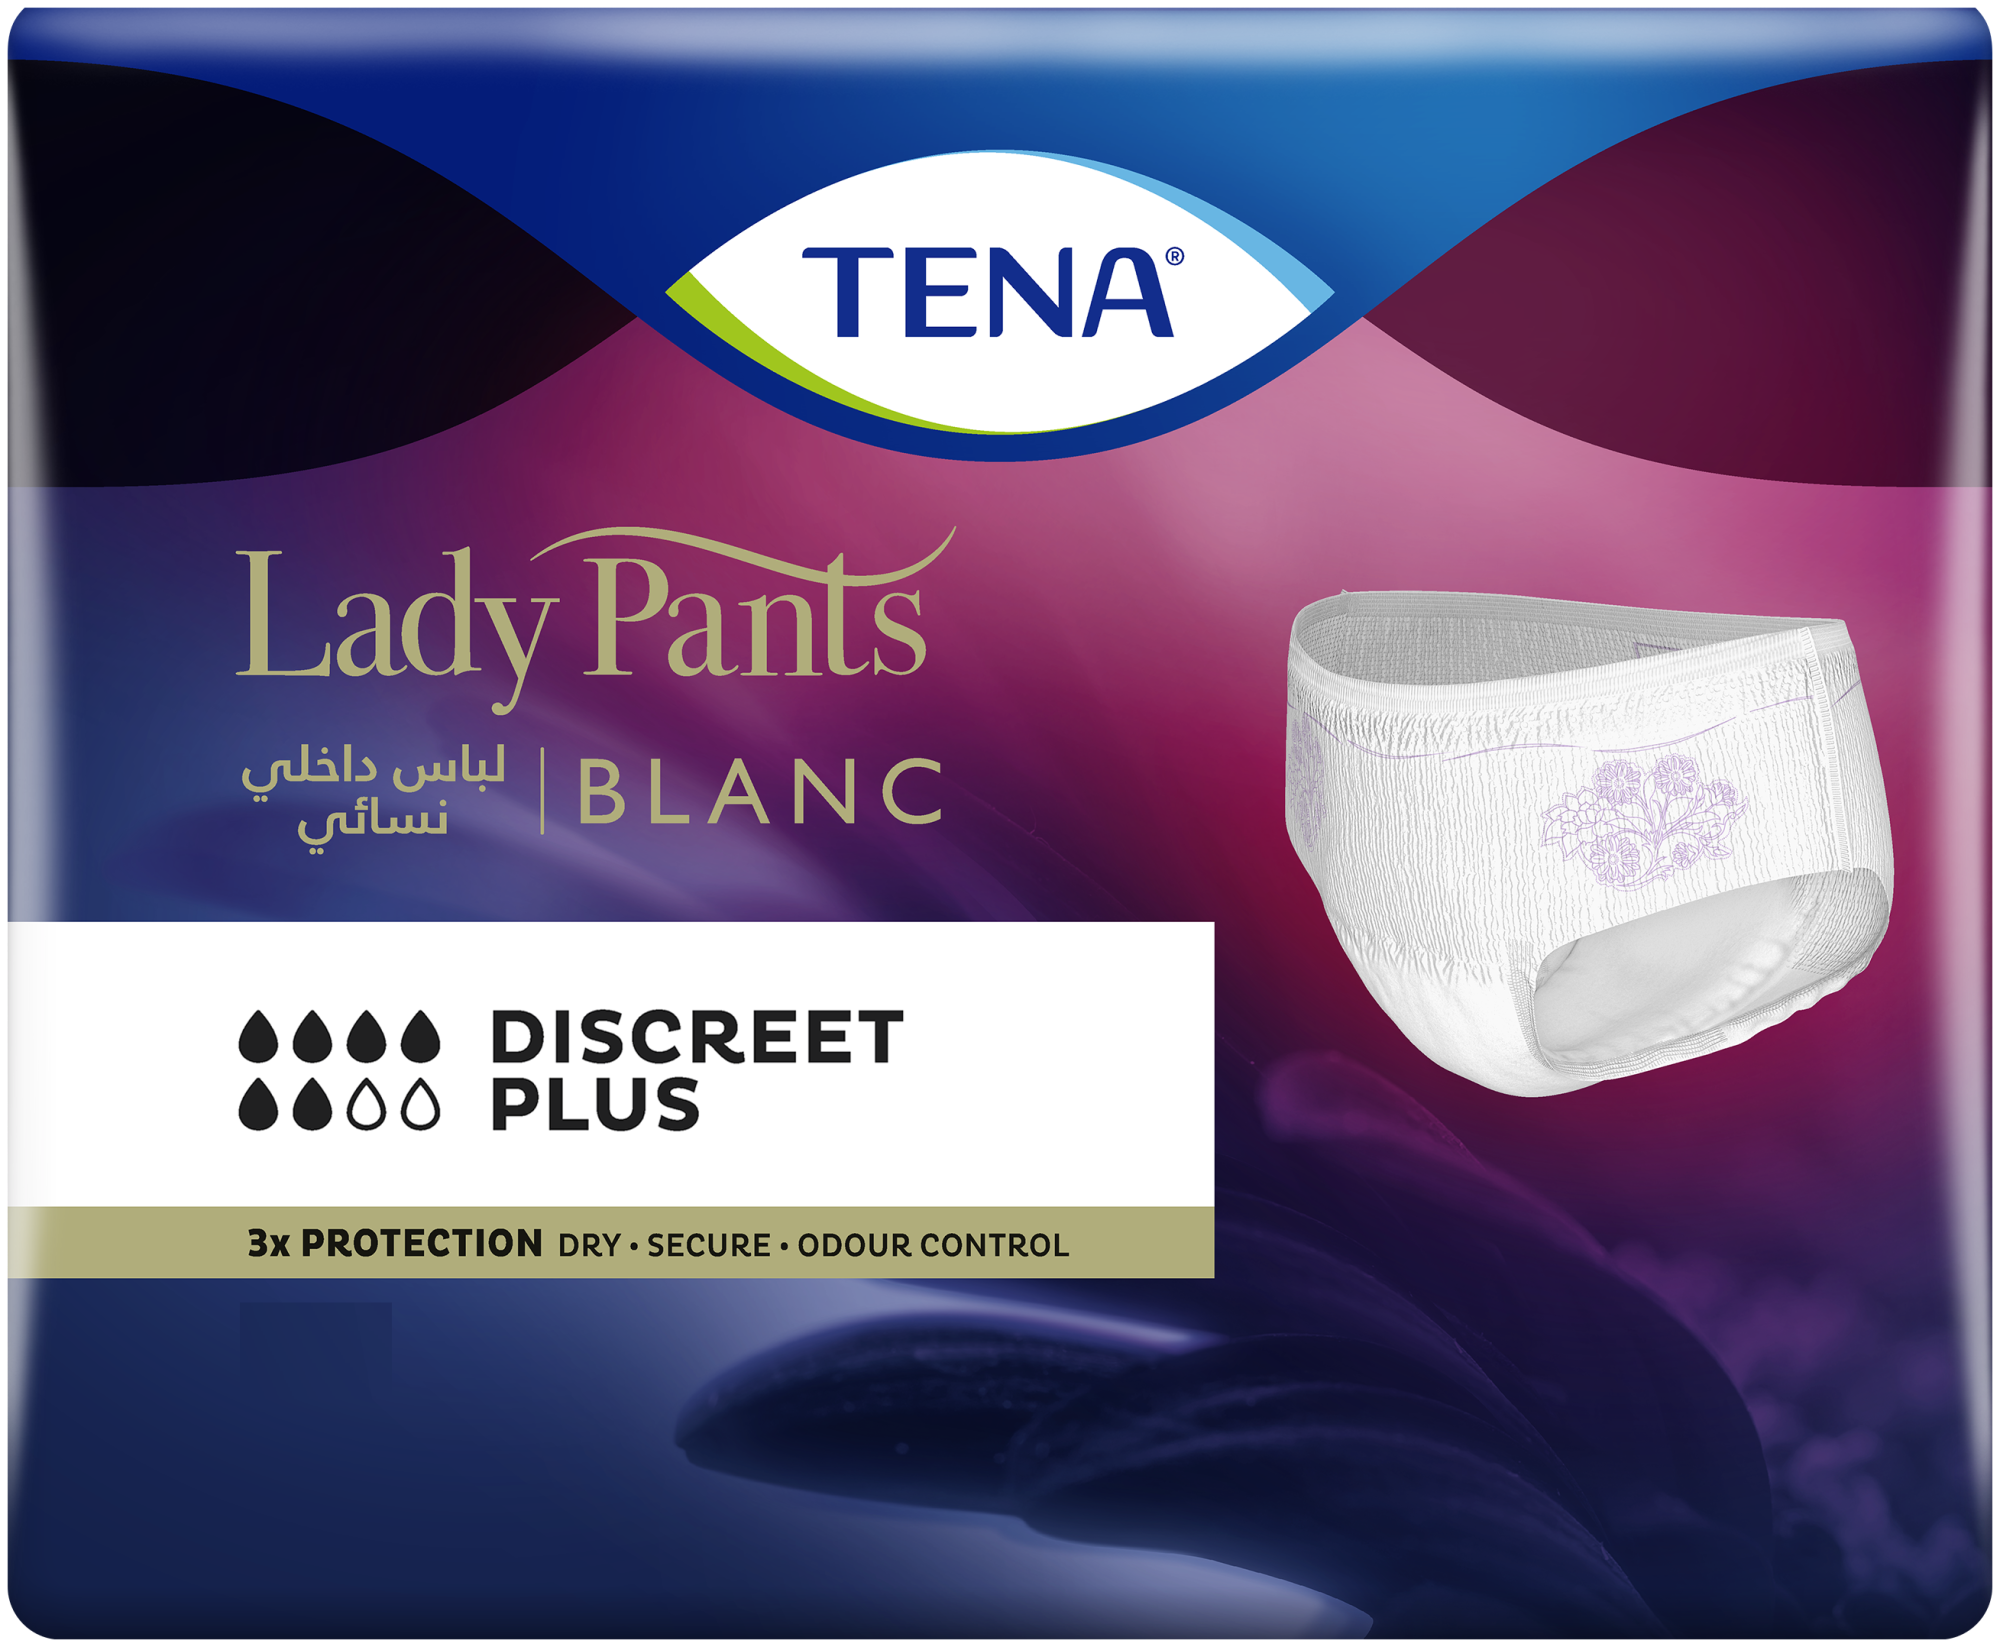 Discreet & secure incontinence pads and underwear for women by TENA